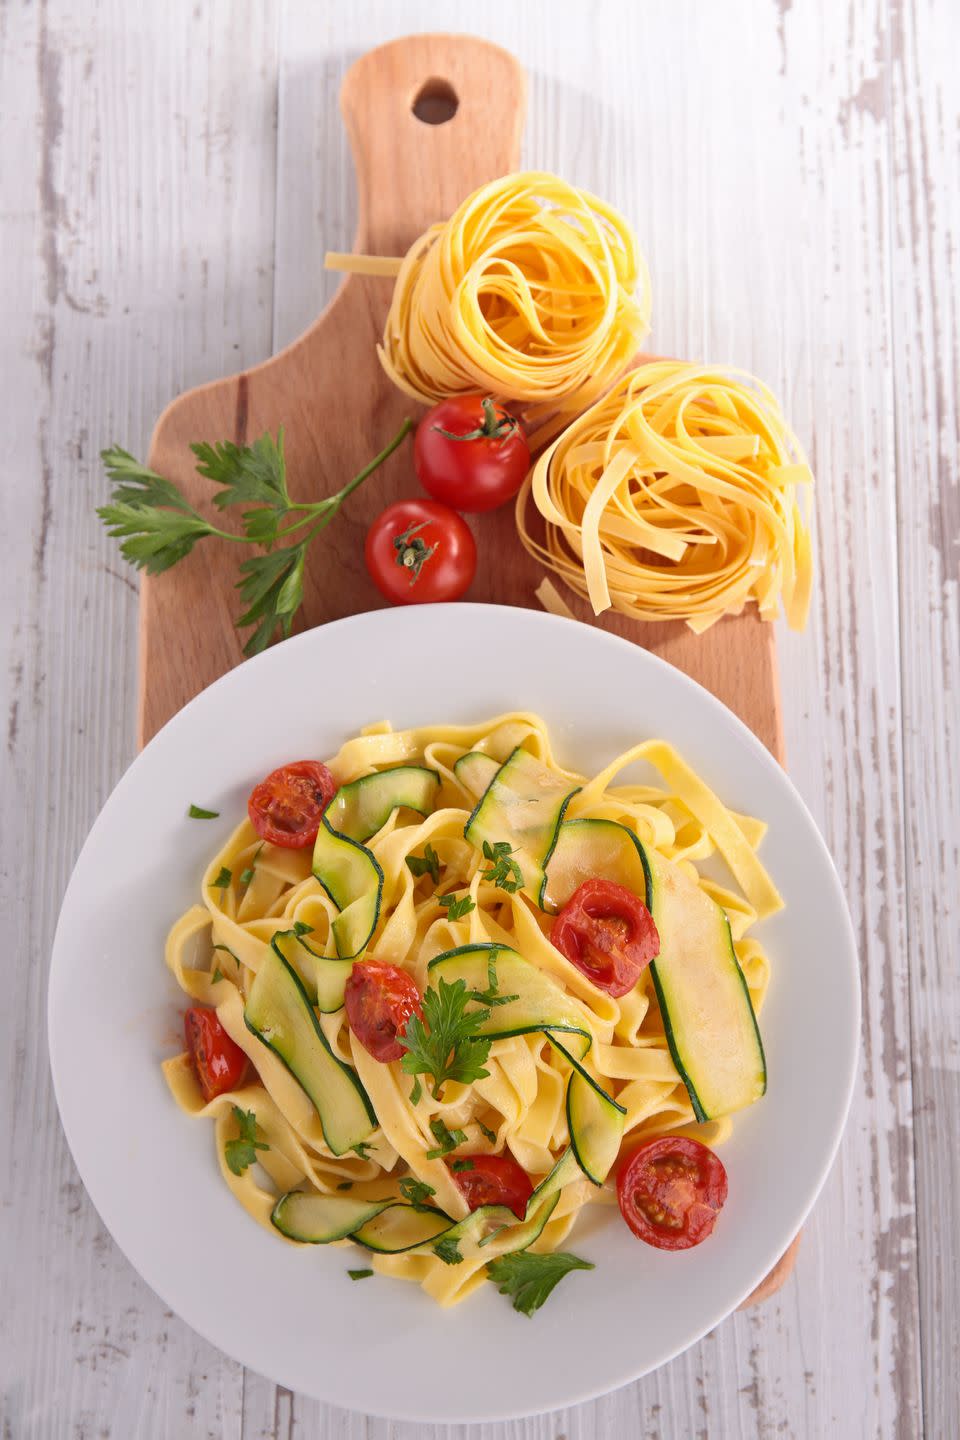 <p>Tagliatelle is a long, ribbon-shaped pasta that's similar to fettuccine. In fact, some people say they’re actually <a href="https://www.popsugar.com/food/Difference-Between-Fettuccine-Tagliatelle-41945041" rel="nofollow noopener" target="_blank" data-ylk="slk:the exact same thing" class="link ">the exact same thing</a>! This pasta is usually known as fettuccine in Rome and Southern Italy, while Northern Italians typically refer to it as tagliatelle. Often server with a rich meat sauce, like bolognese, it's also delicious with fresh vegetables.</p><p><strong>Try it in<a href="https://www.countryliving.com/food-drinks/recipes/a31162/tagliatelle-pesto-asparagus-shrimp-recipe-rbk0412/" rel="nofollow noopener" target="_blank" data-ylk="slk:Tagliatelle with Pesto, Asparagus, and Shrimp" class="link "> Tagliatelle with Pesto, Asparagus, and Shrimp</a></strong></p>